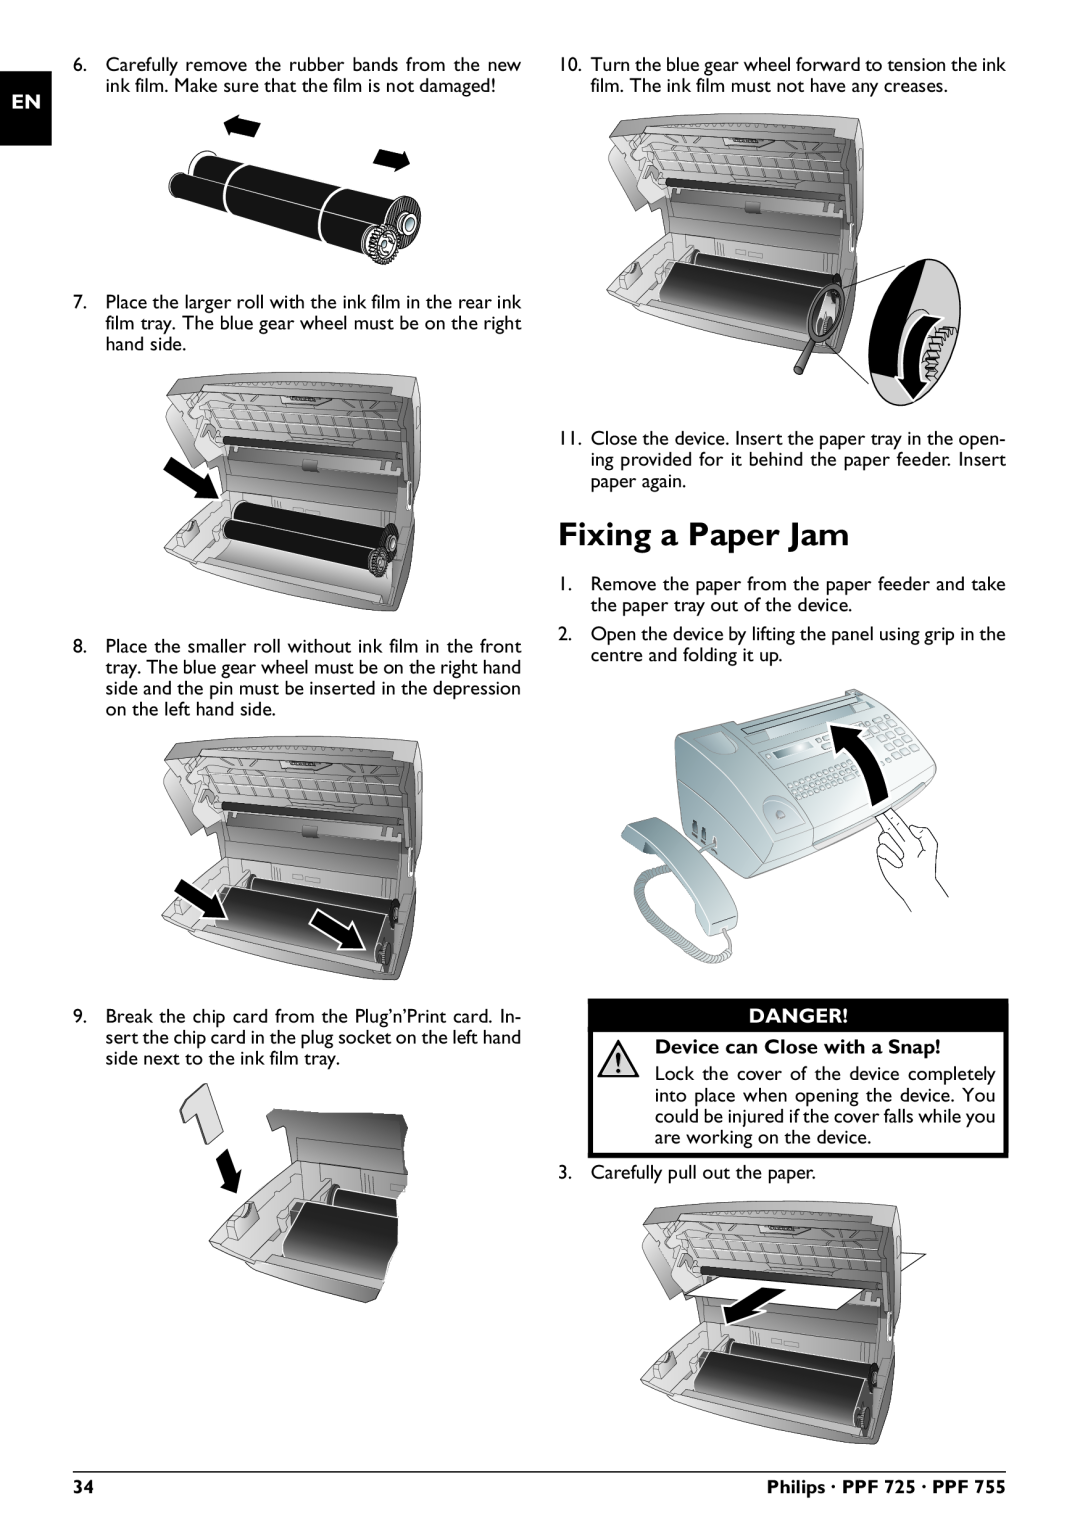 Philips PPF 755, PPF 725 user manual Fixing a Paper Jam, Danger, Device can Close with a Snap 